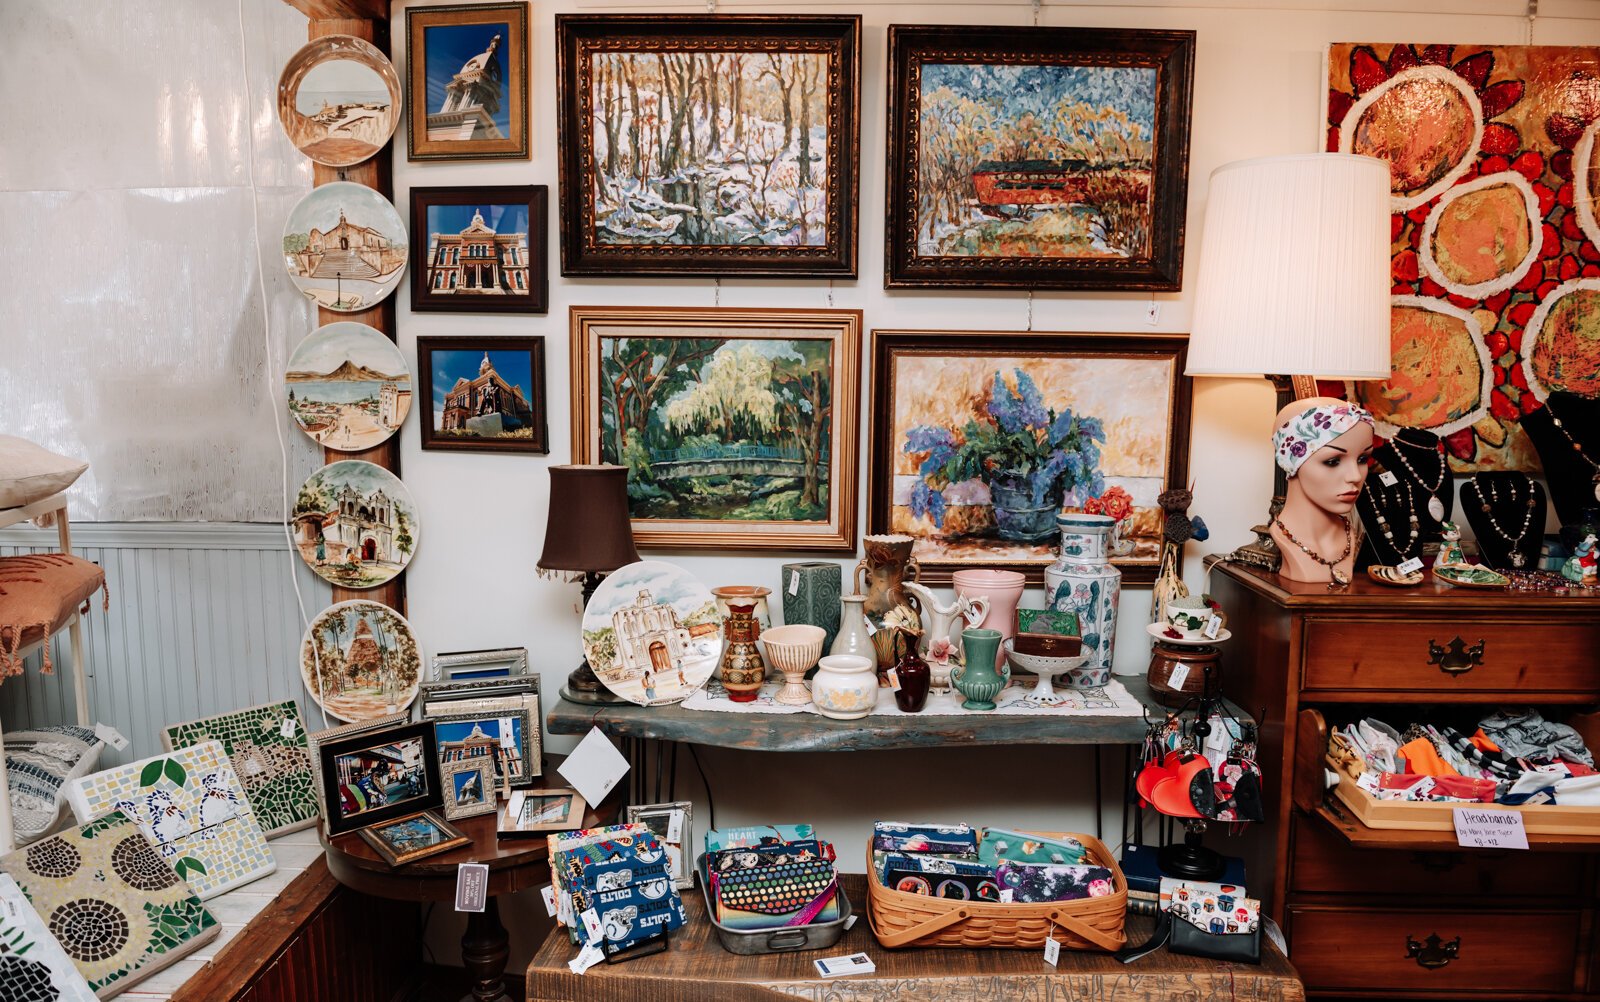 The Eclectic Shoppe features a lot of handmade and artistic goods at 42 W Canal St, Wabash, IN.